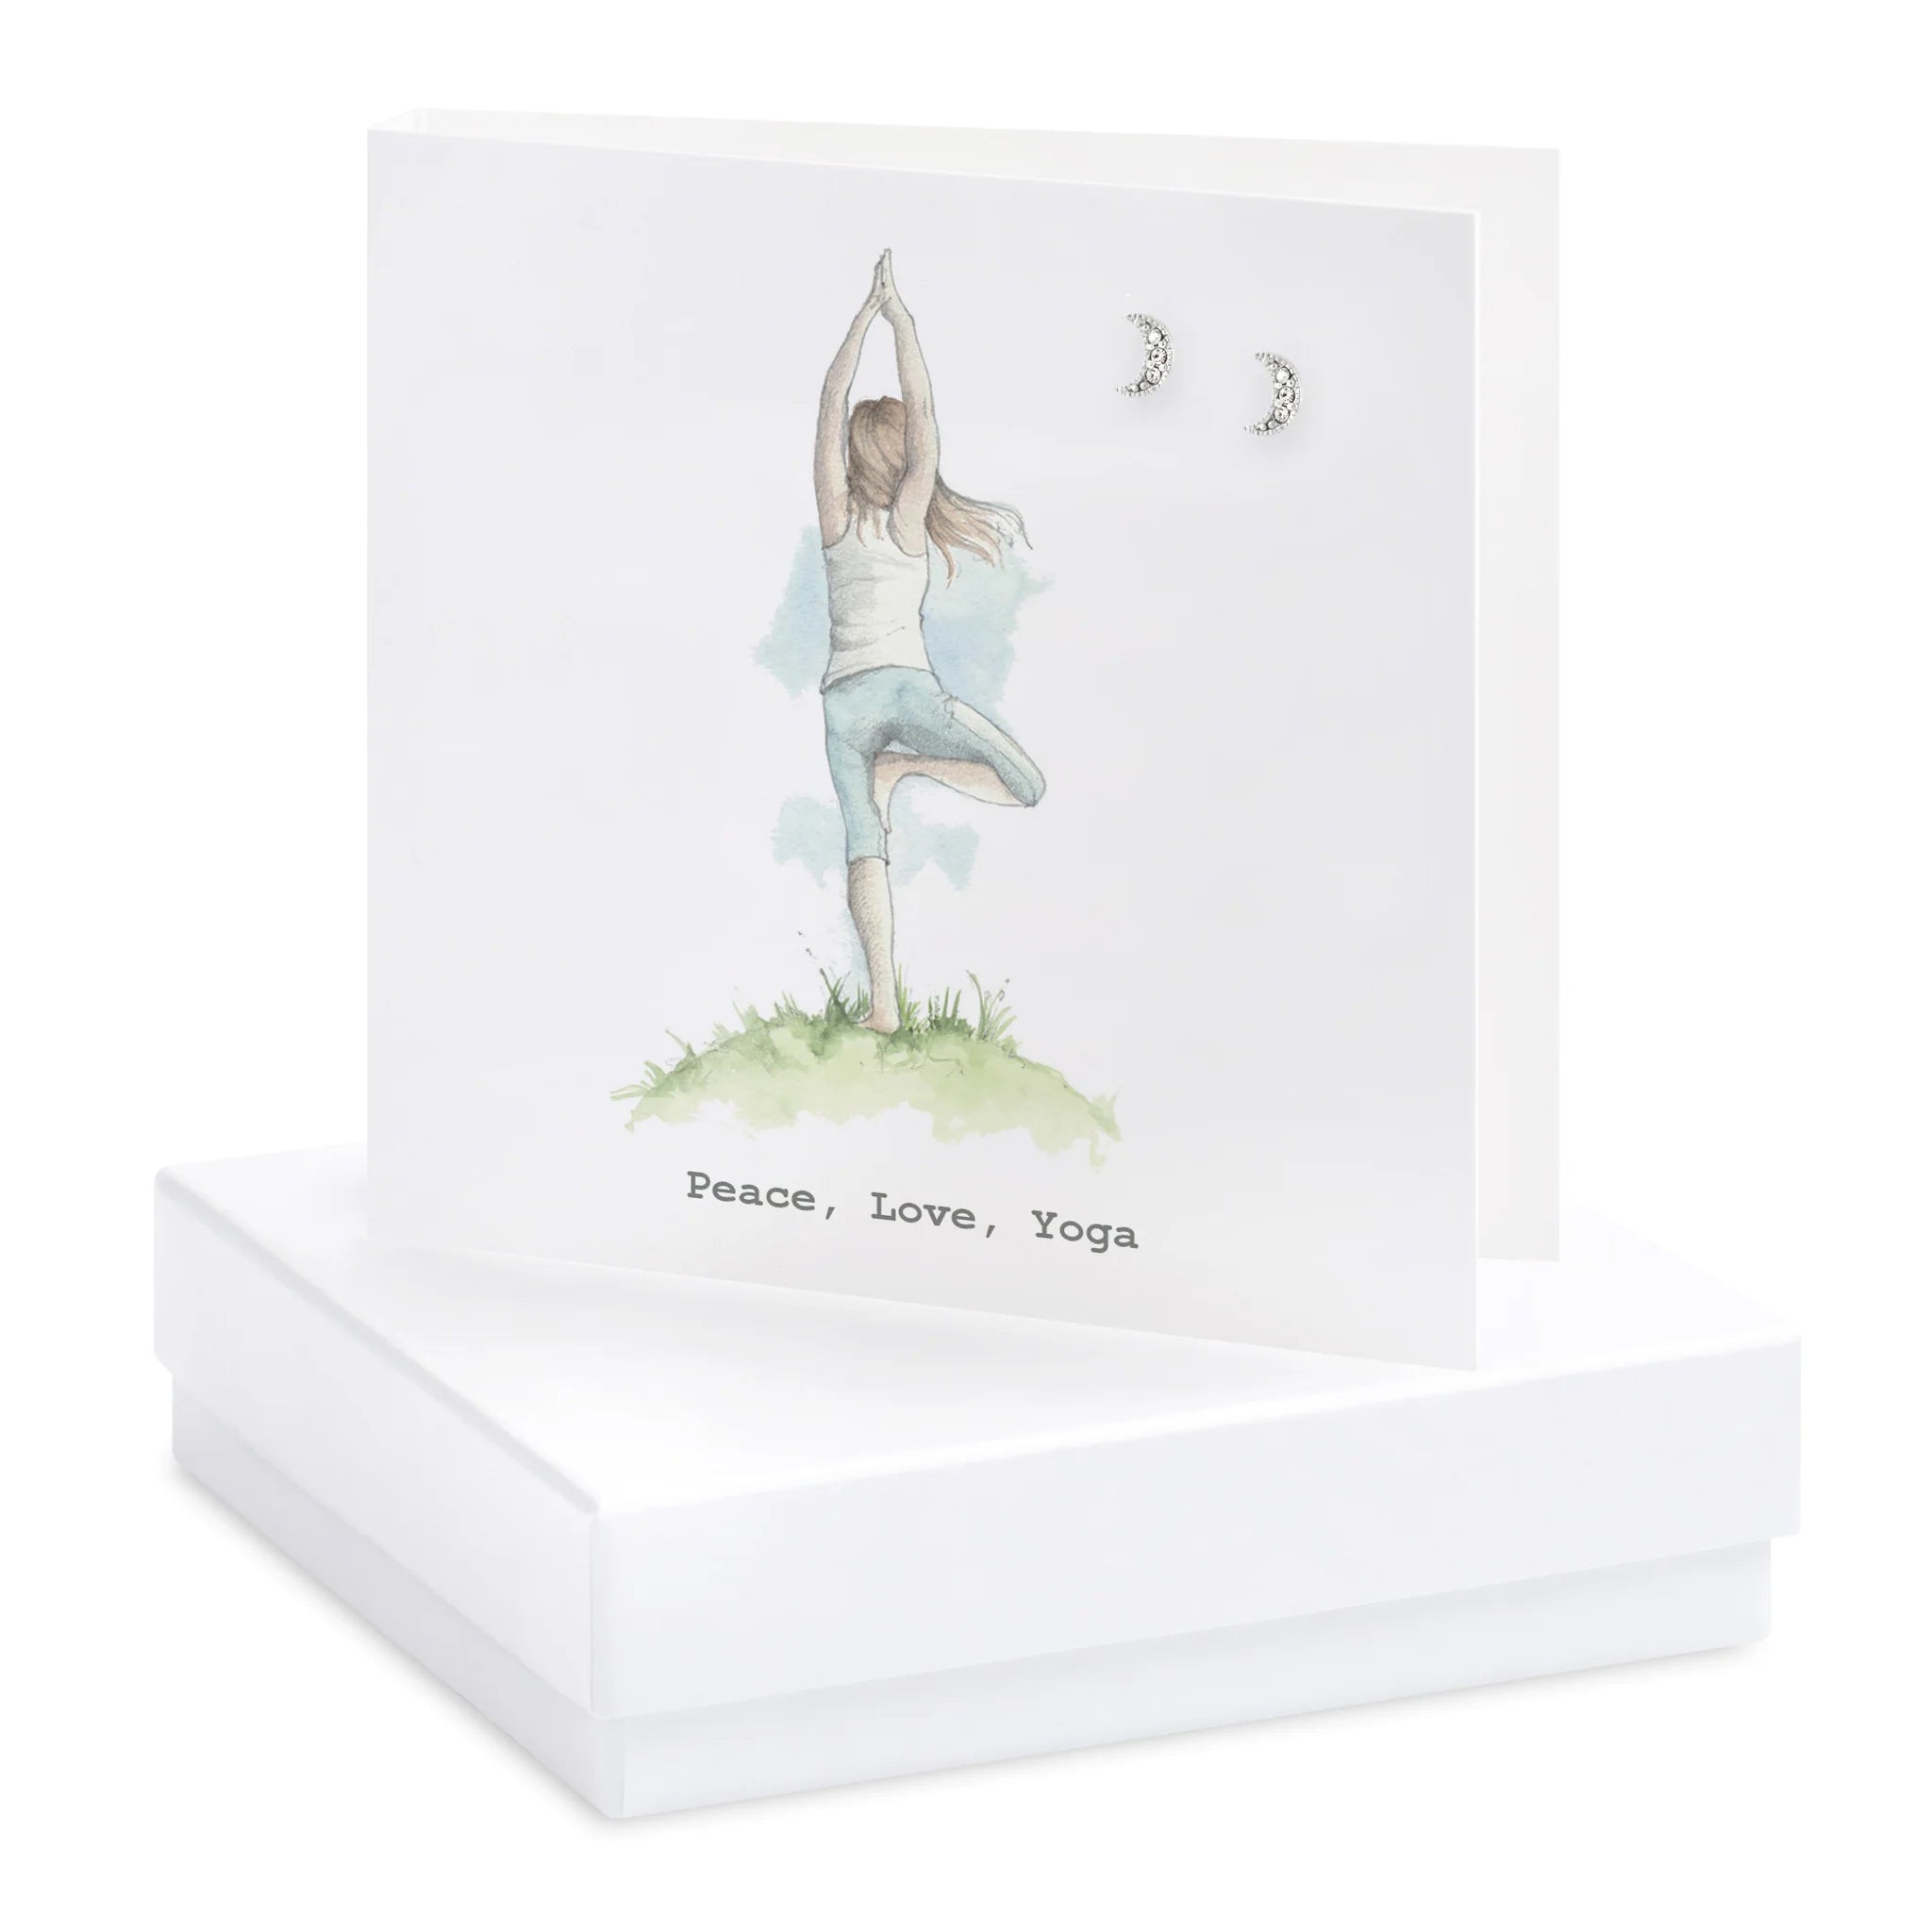 Crumble & Core Yoga Card with Earrings in a White Box by Weirs of Baggot Street